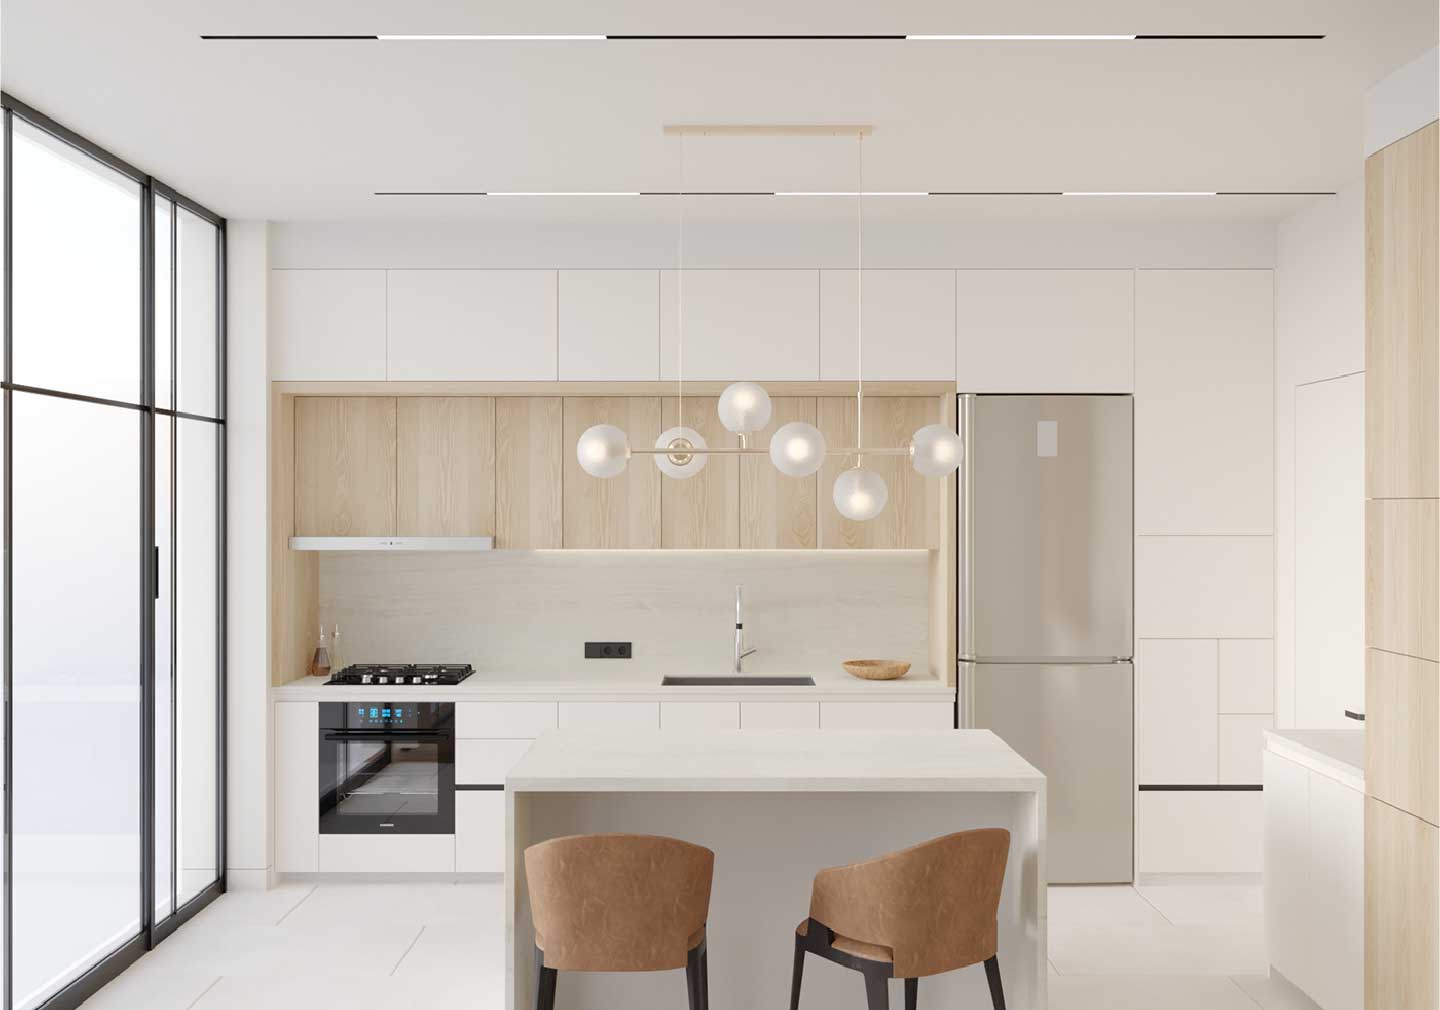 Functionality and Modern Appliances: for modular kitchen interiors